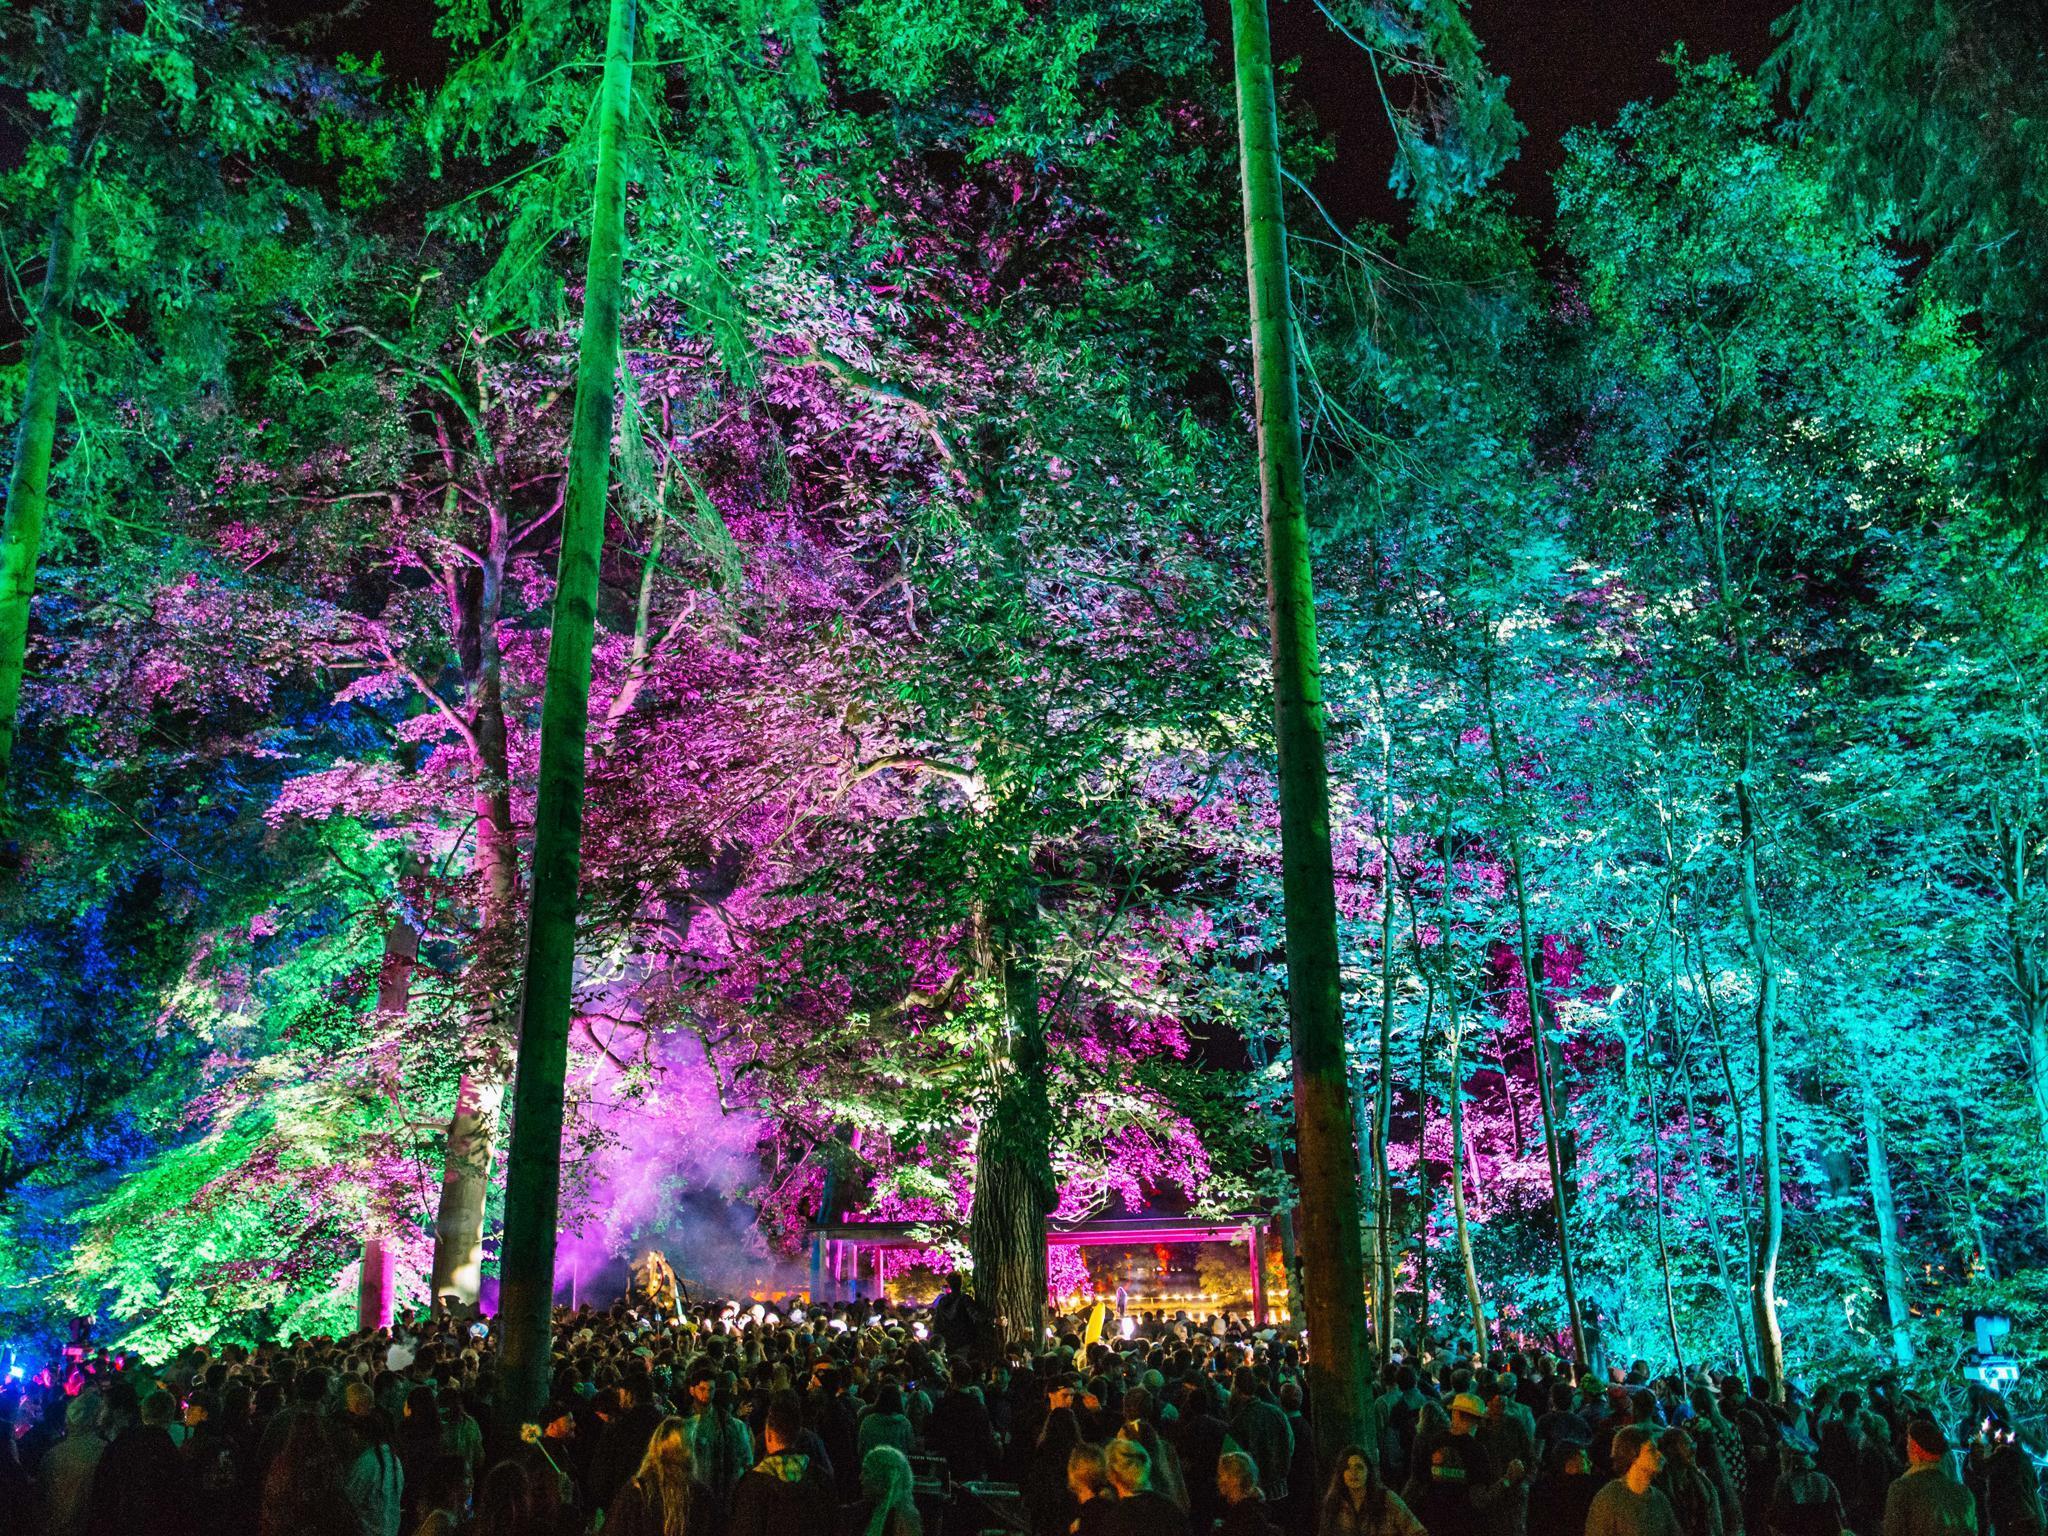 The illuminated trees above the lakeside Pavilion stage at Houghton